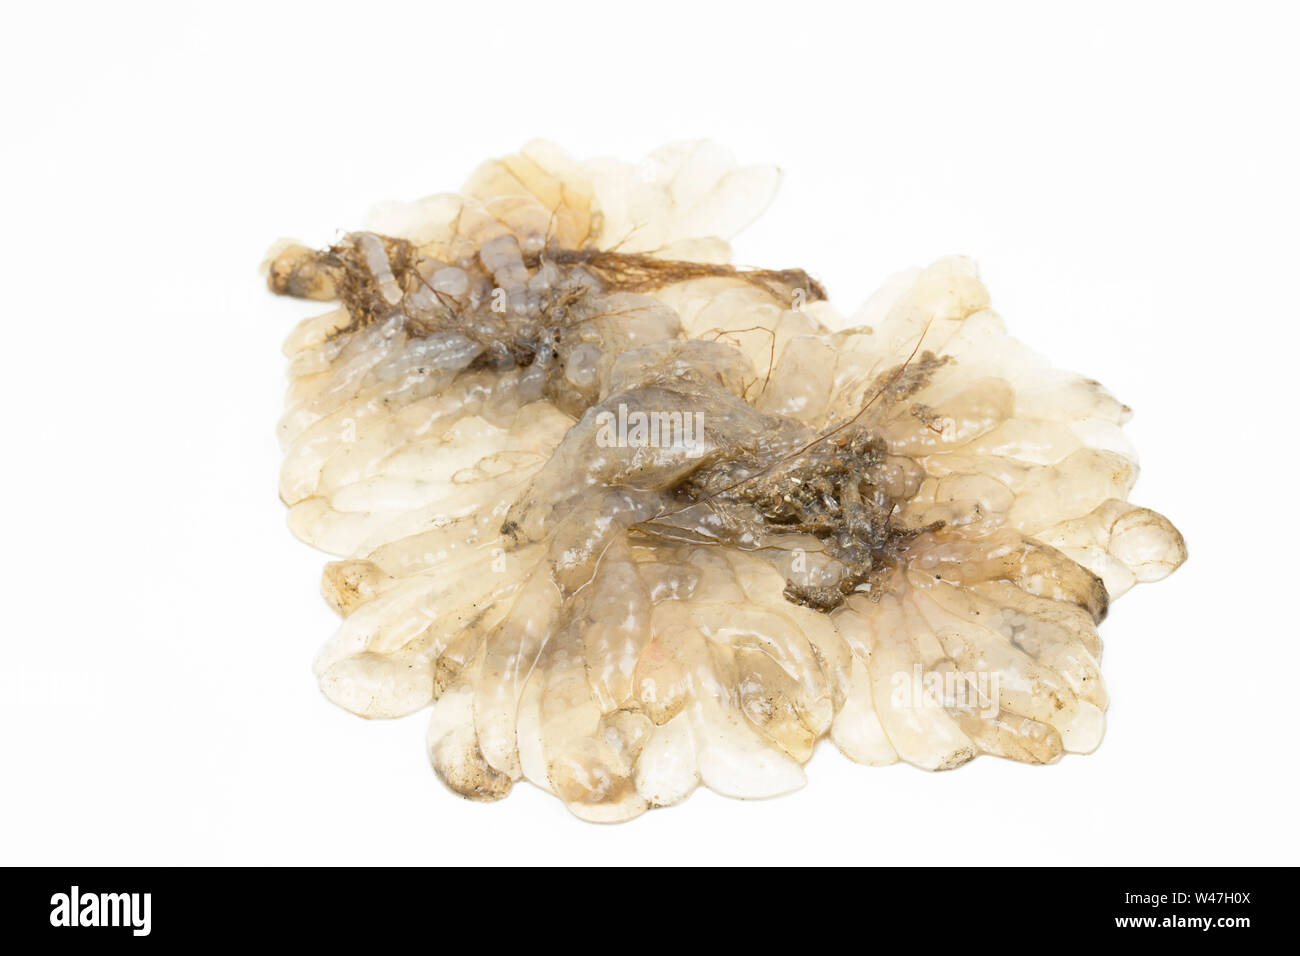 A clump of squid eggs, or spawn, found in the English Channel and photographed on a white background in a studio. Dorset England UK GB Stock Photo